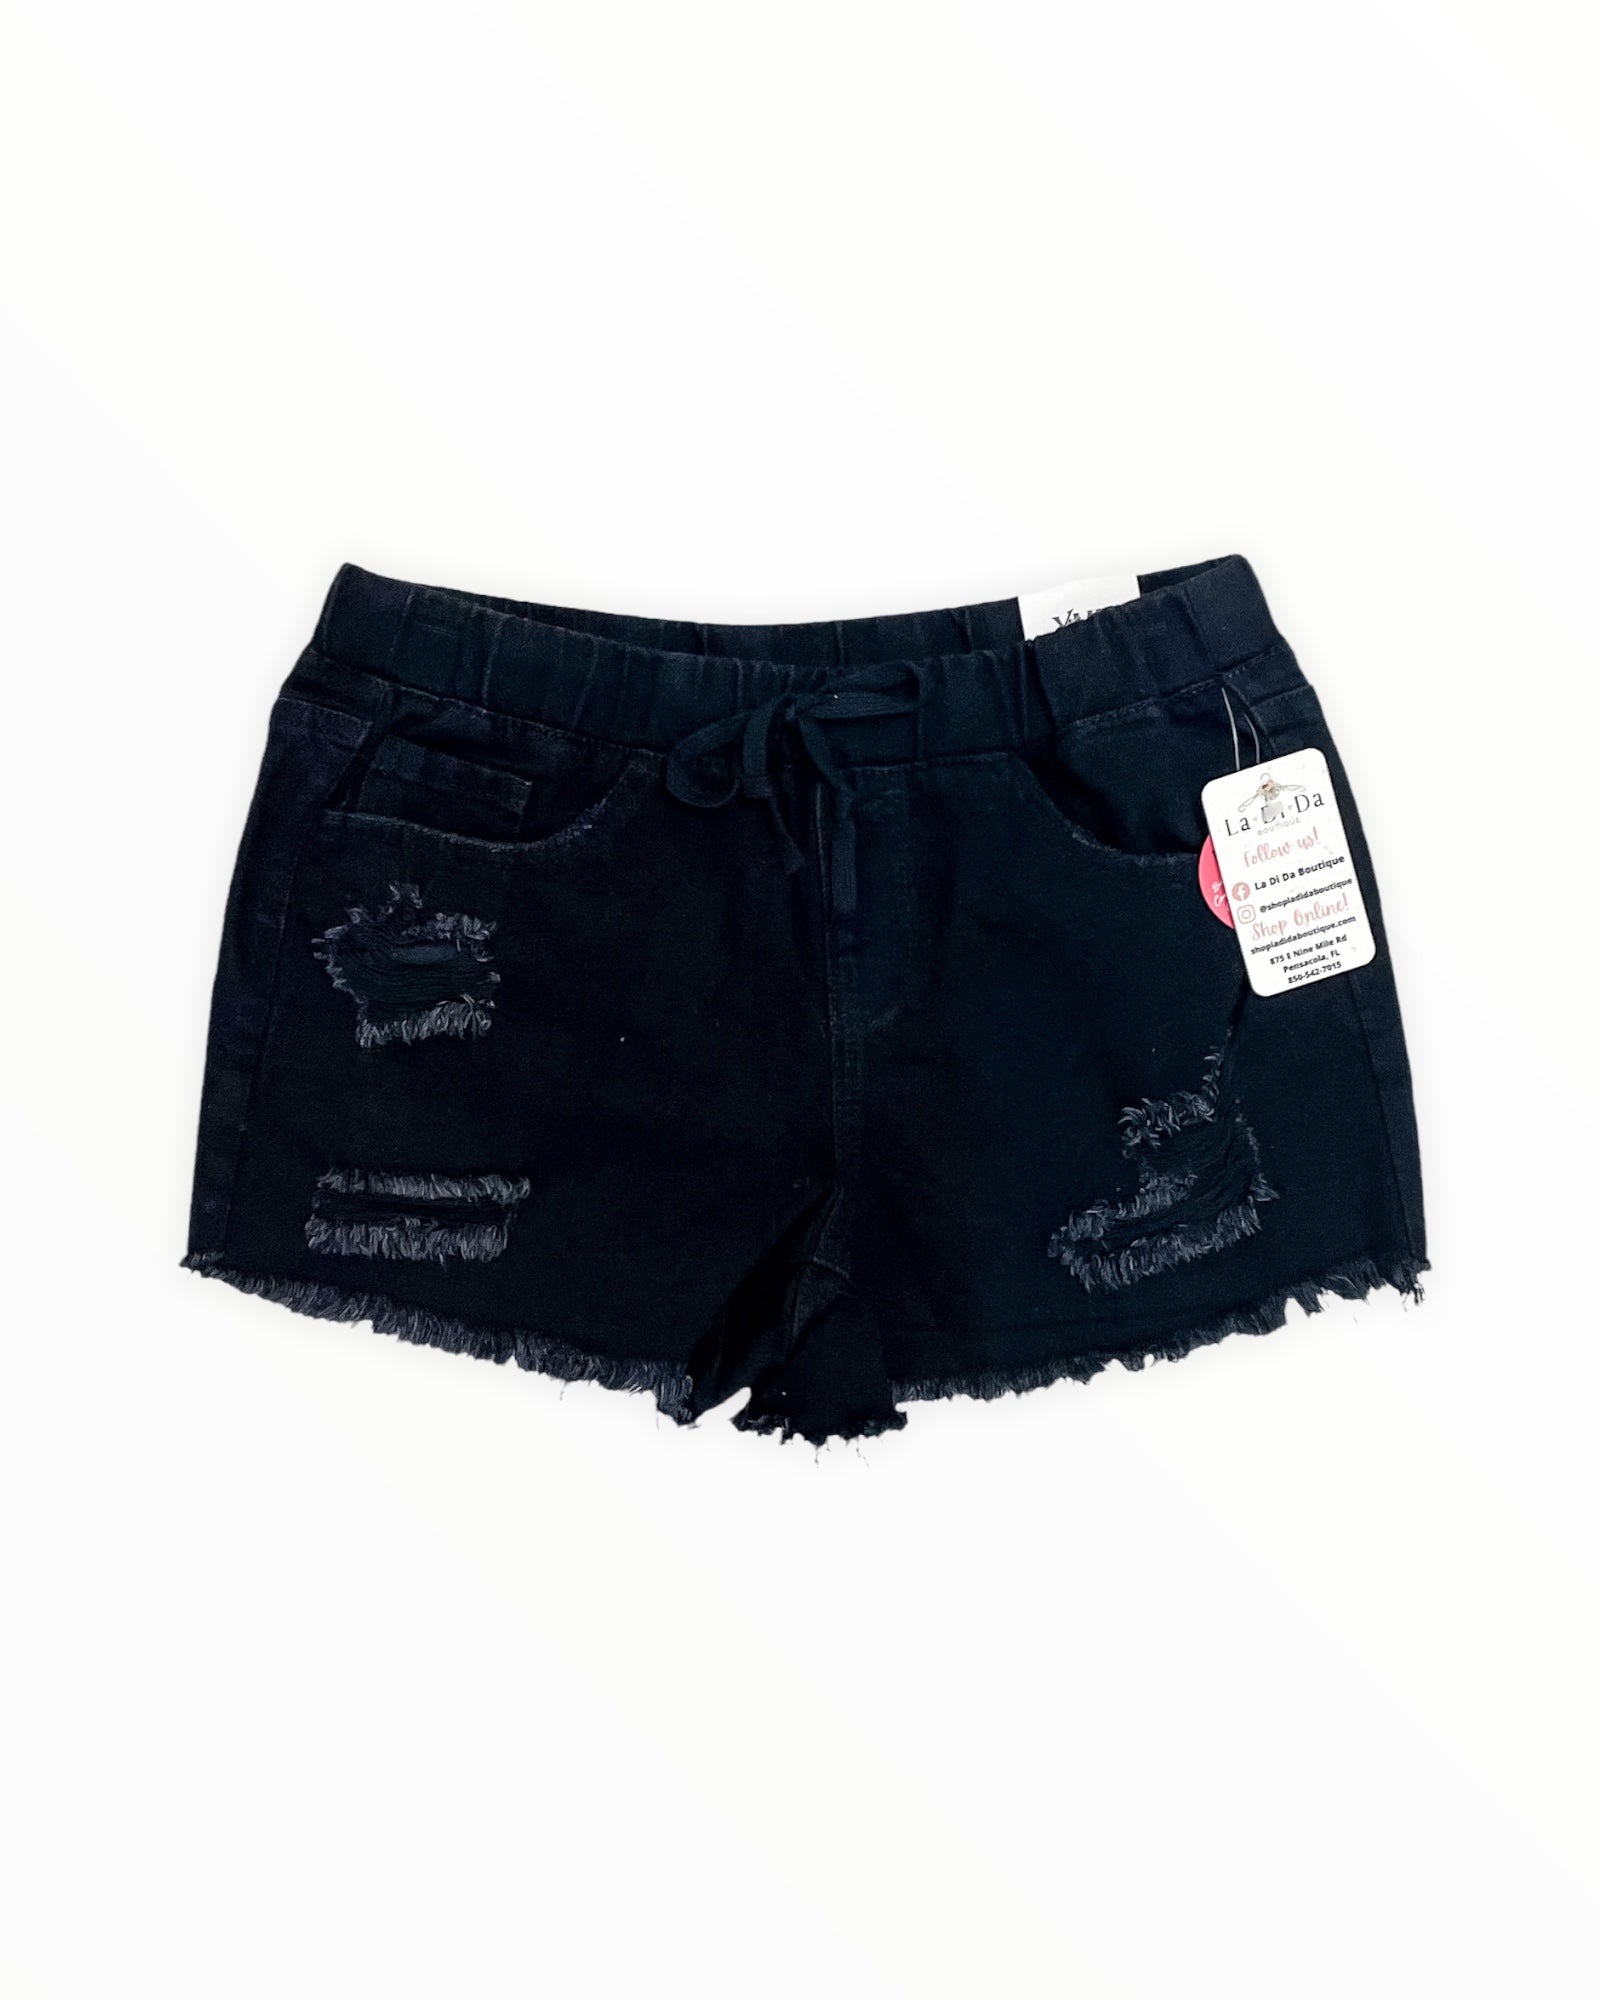 Your Favorite Distressed Shorts, Black